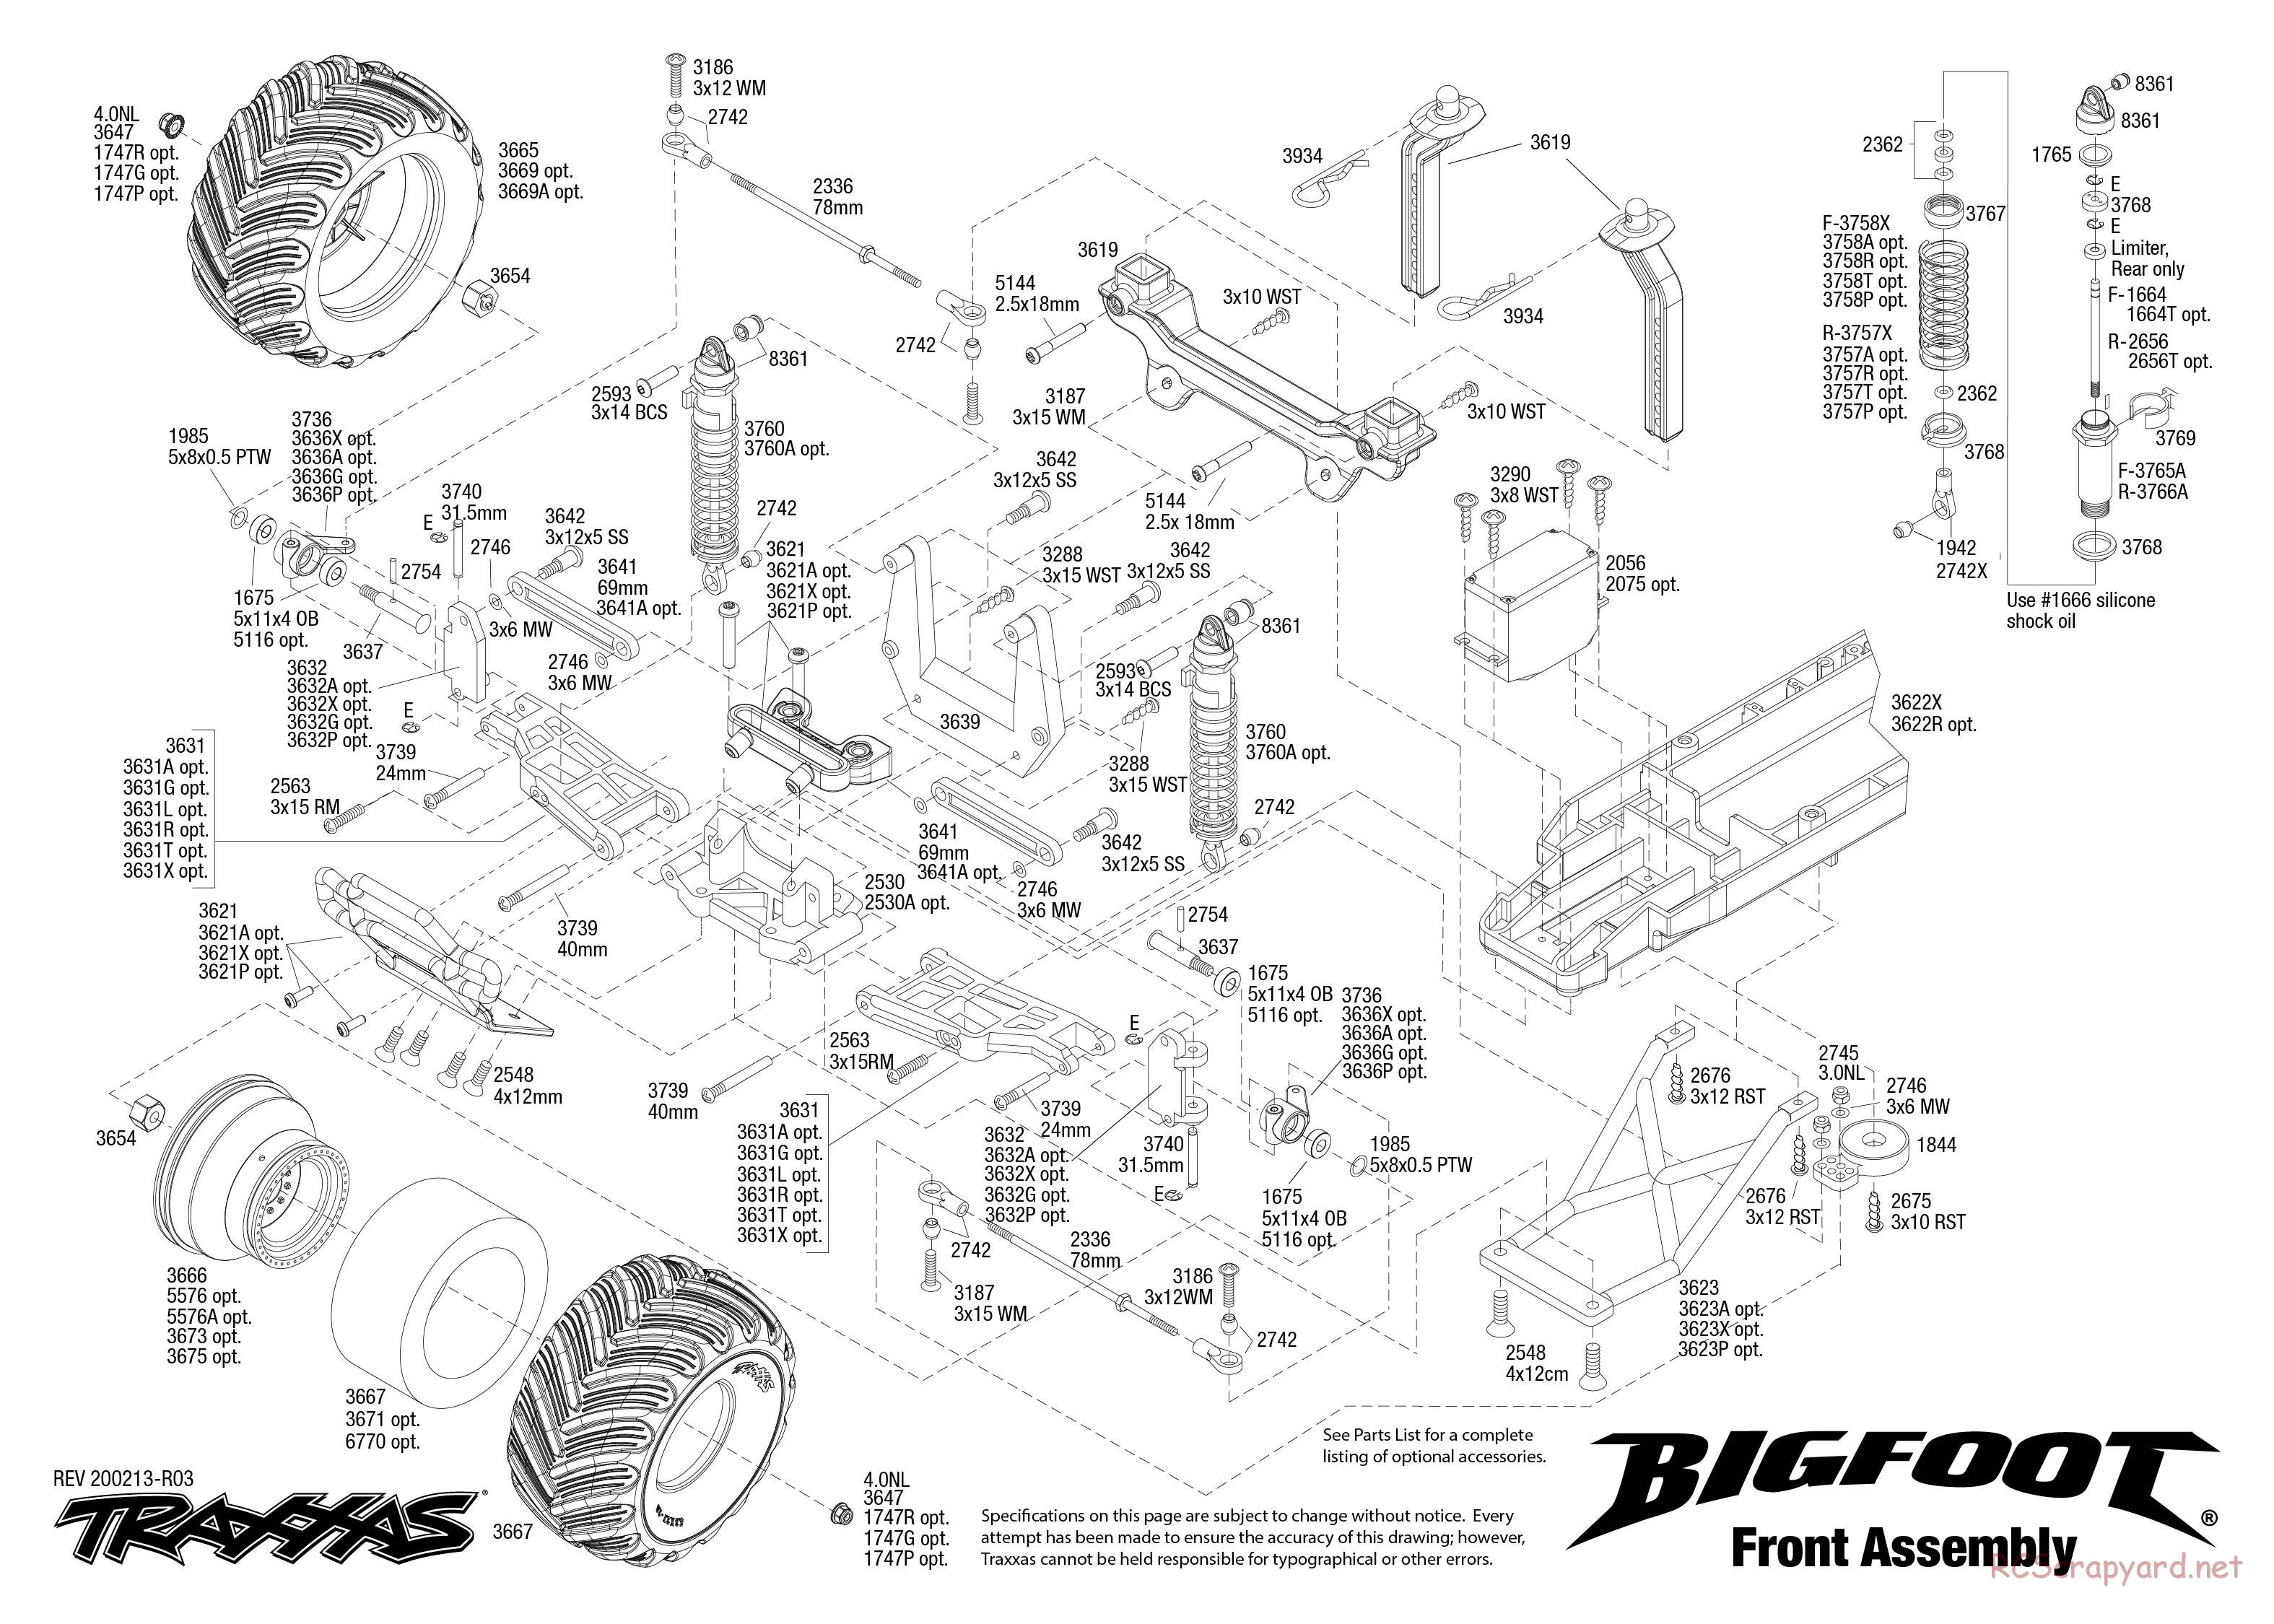 Traxxas - Bigfoot - Exploded Views - Page 2